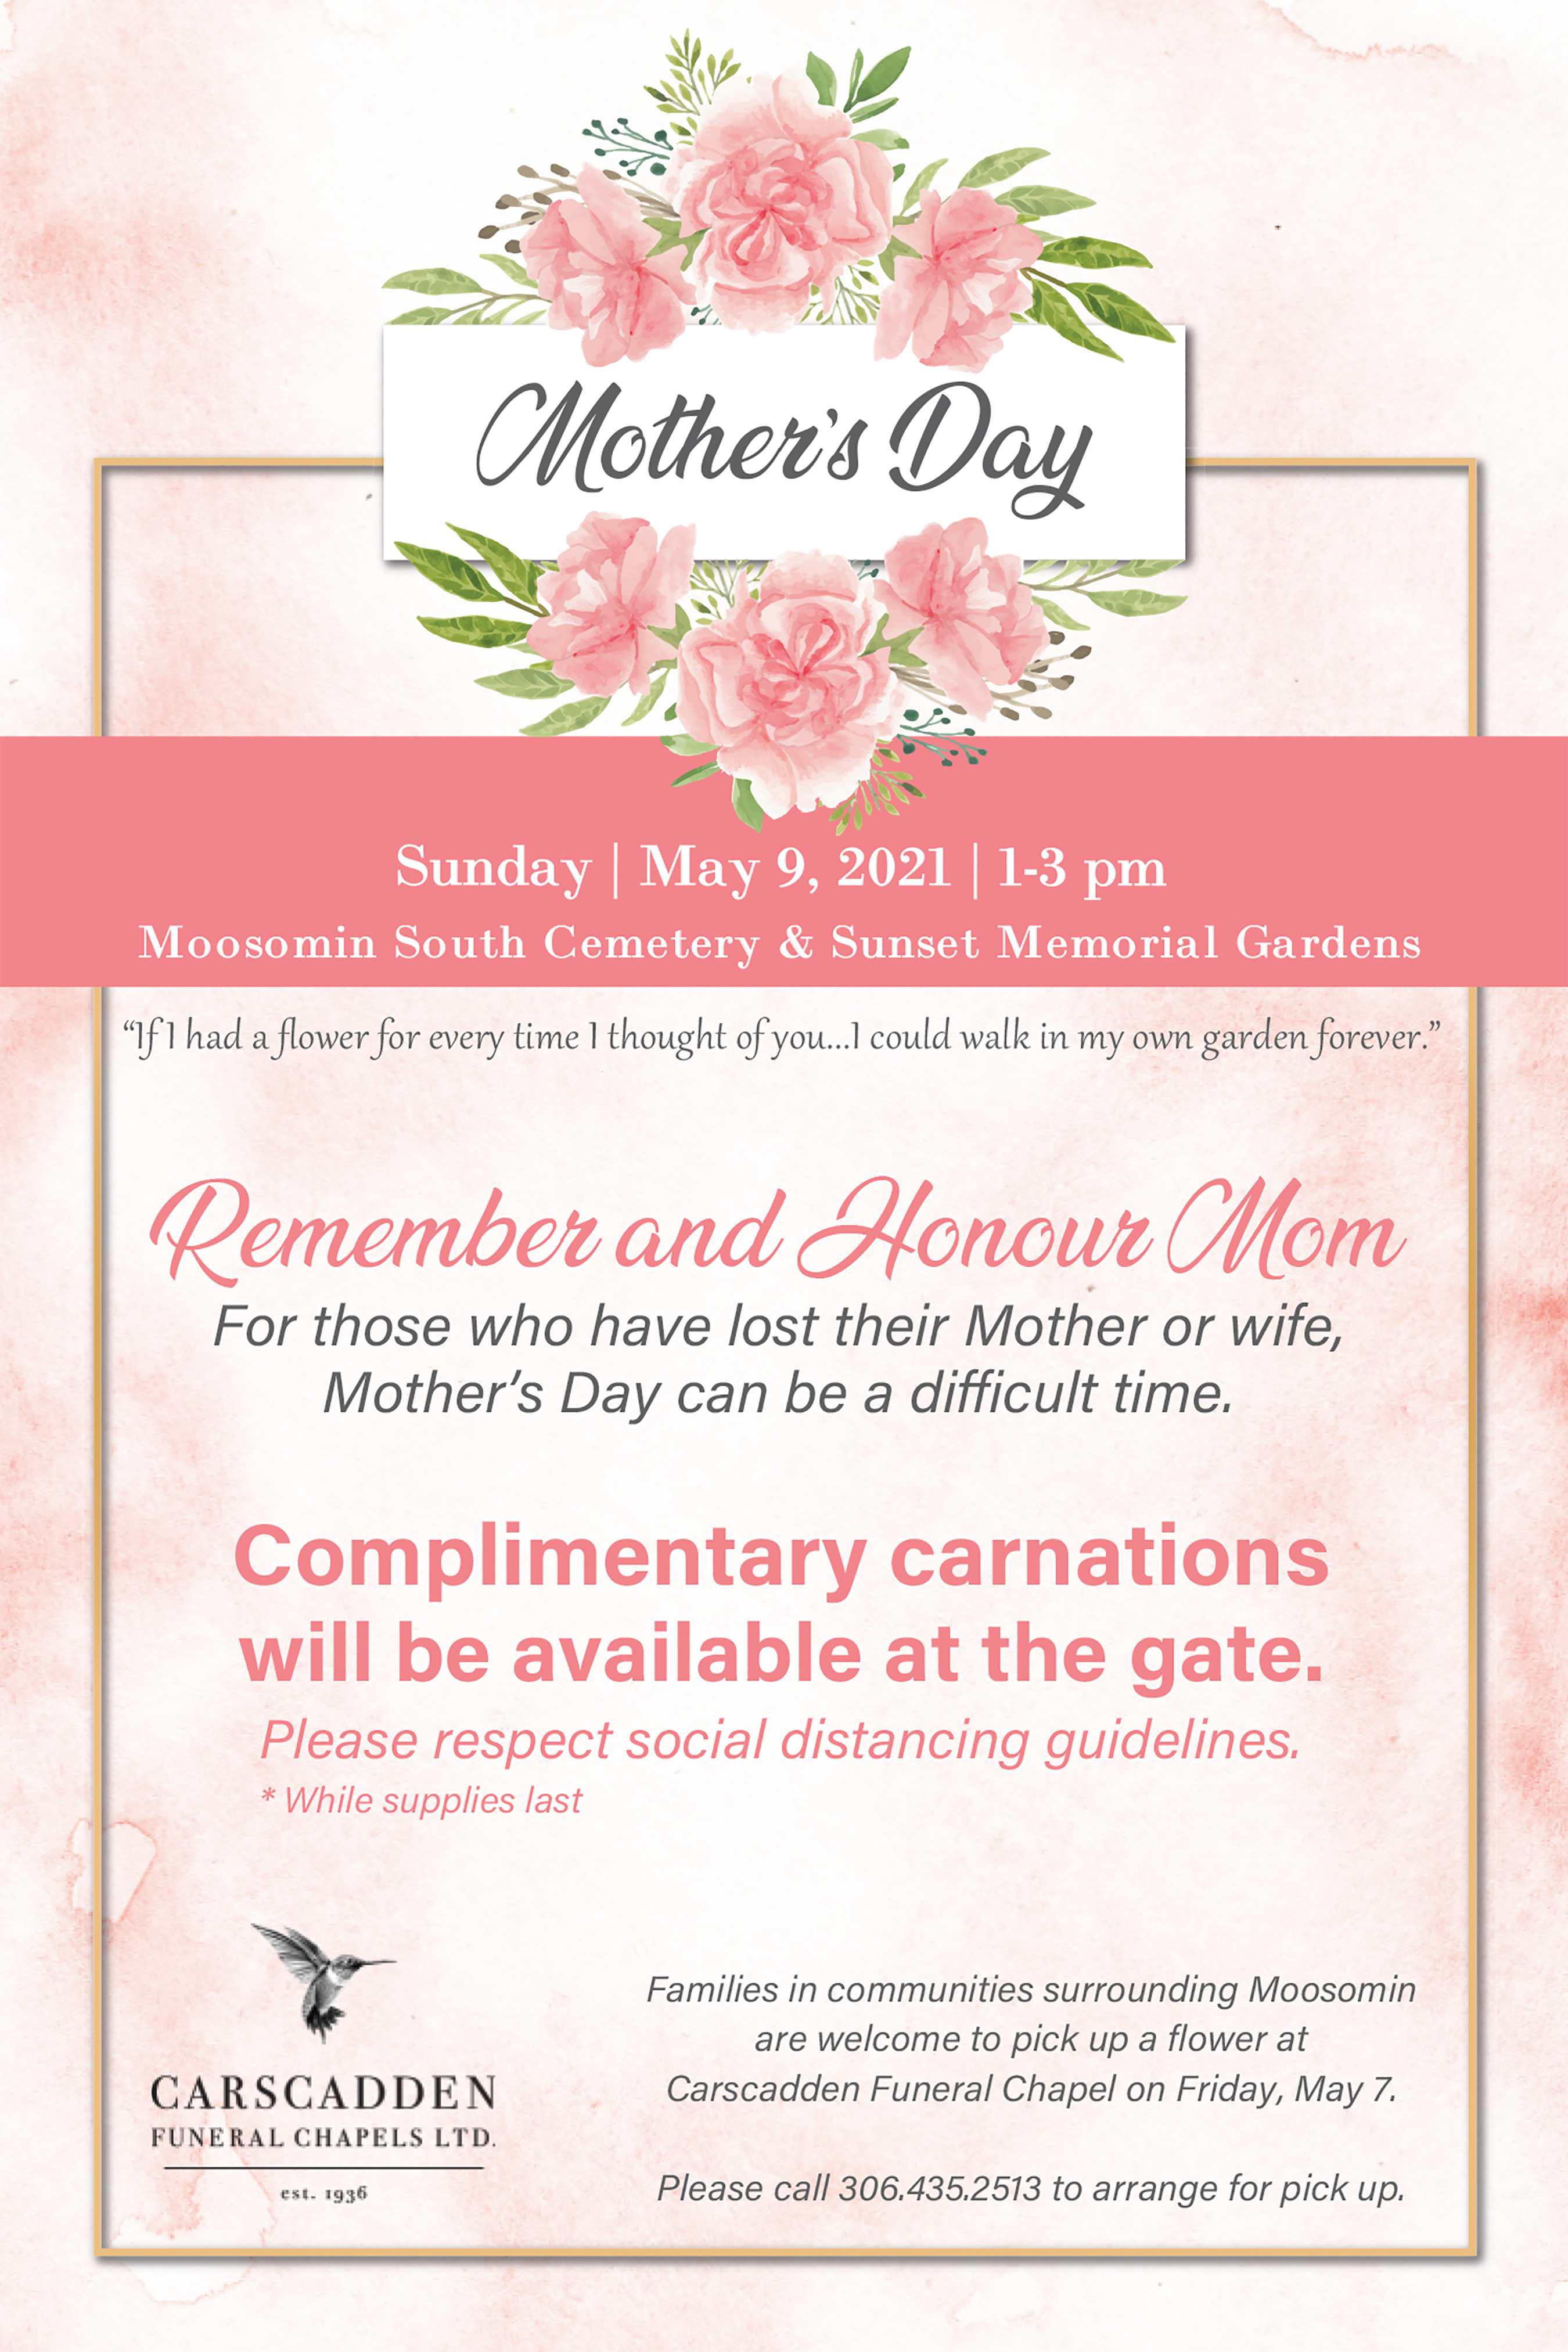 Carscadden's Mother's Day Ad